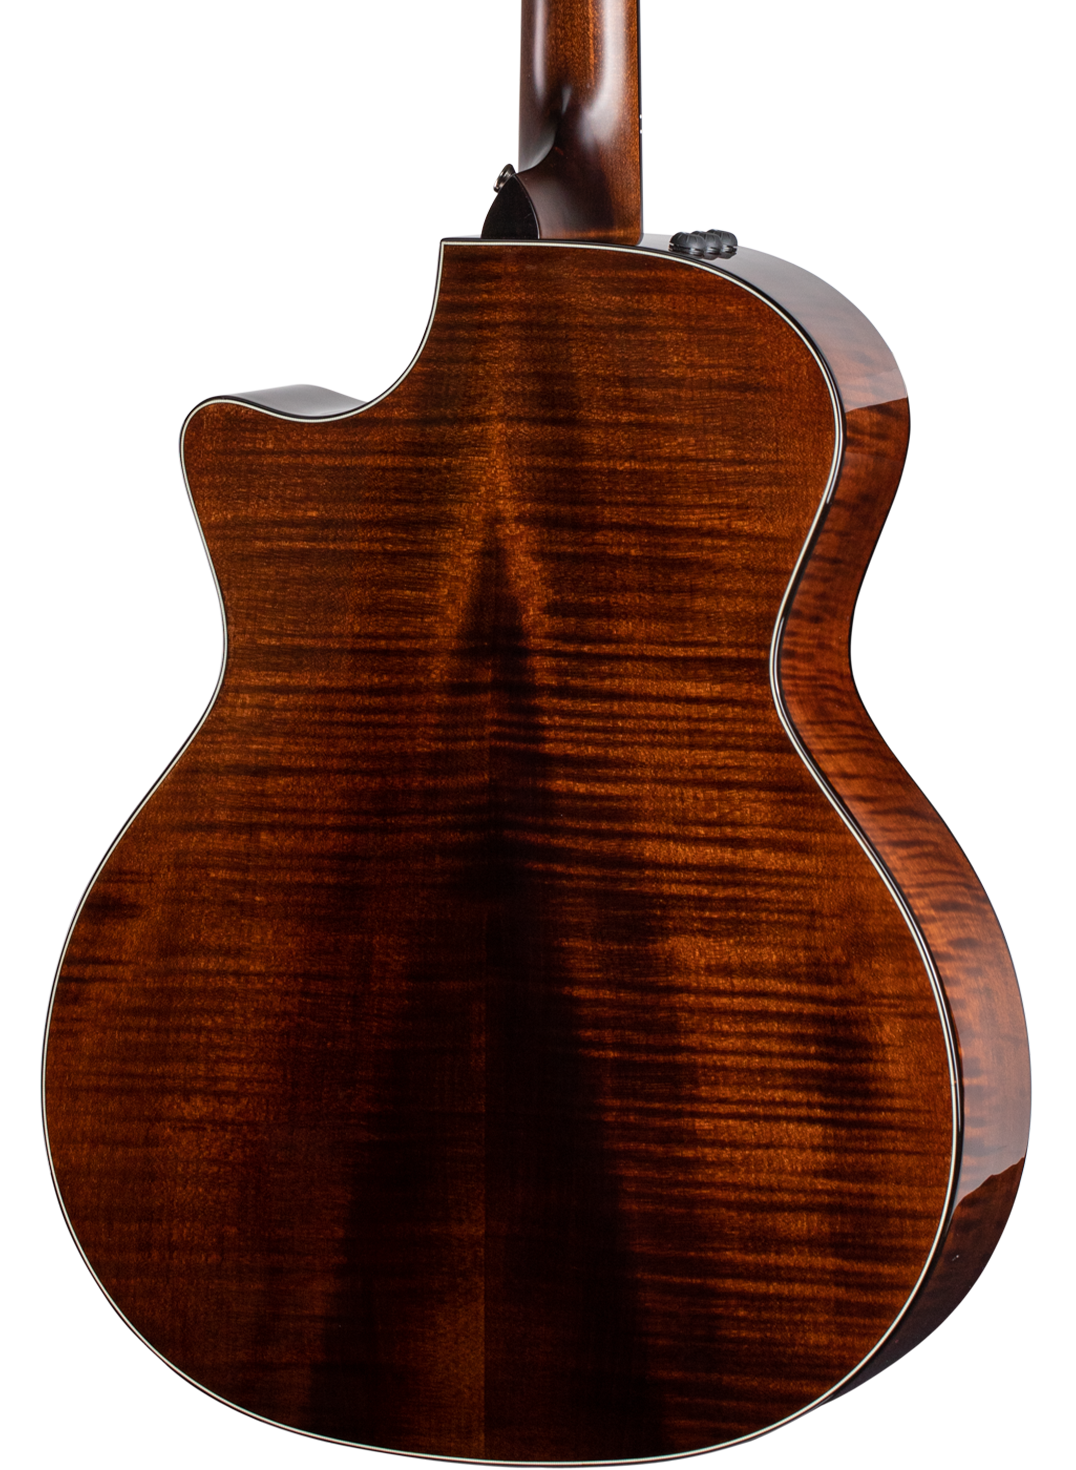 taylor-features-back-woods-maple-614ce